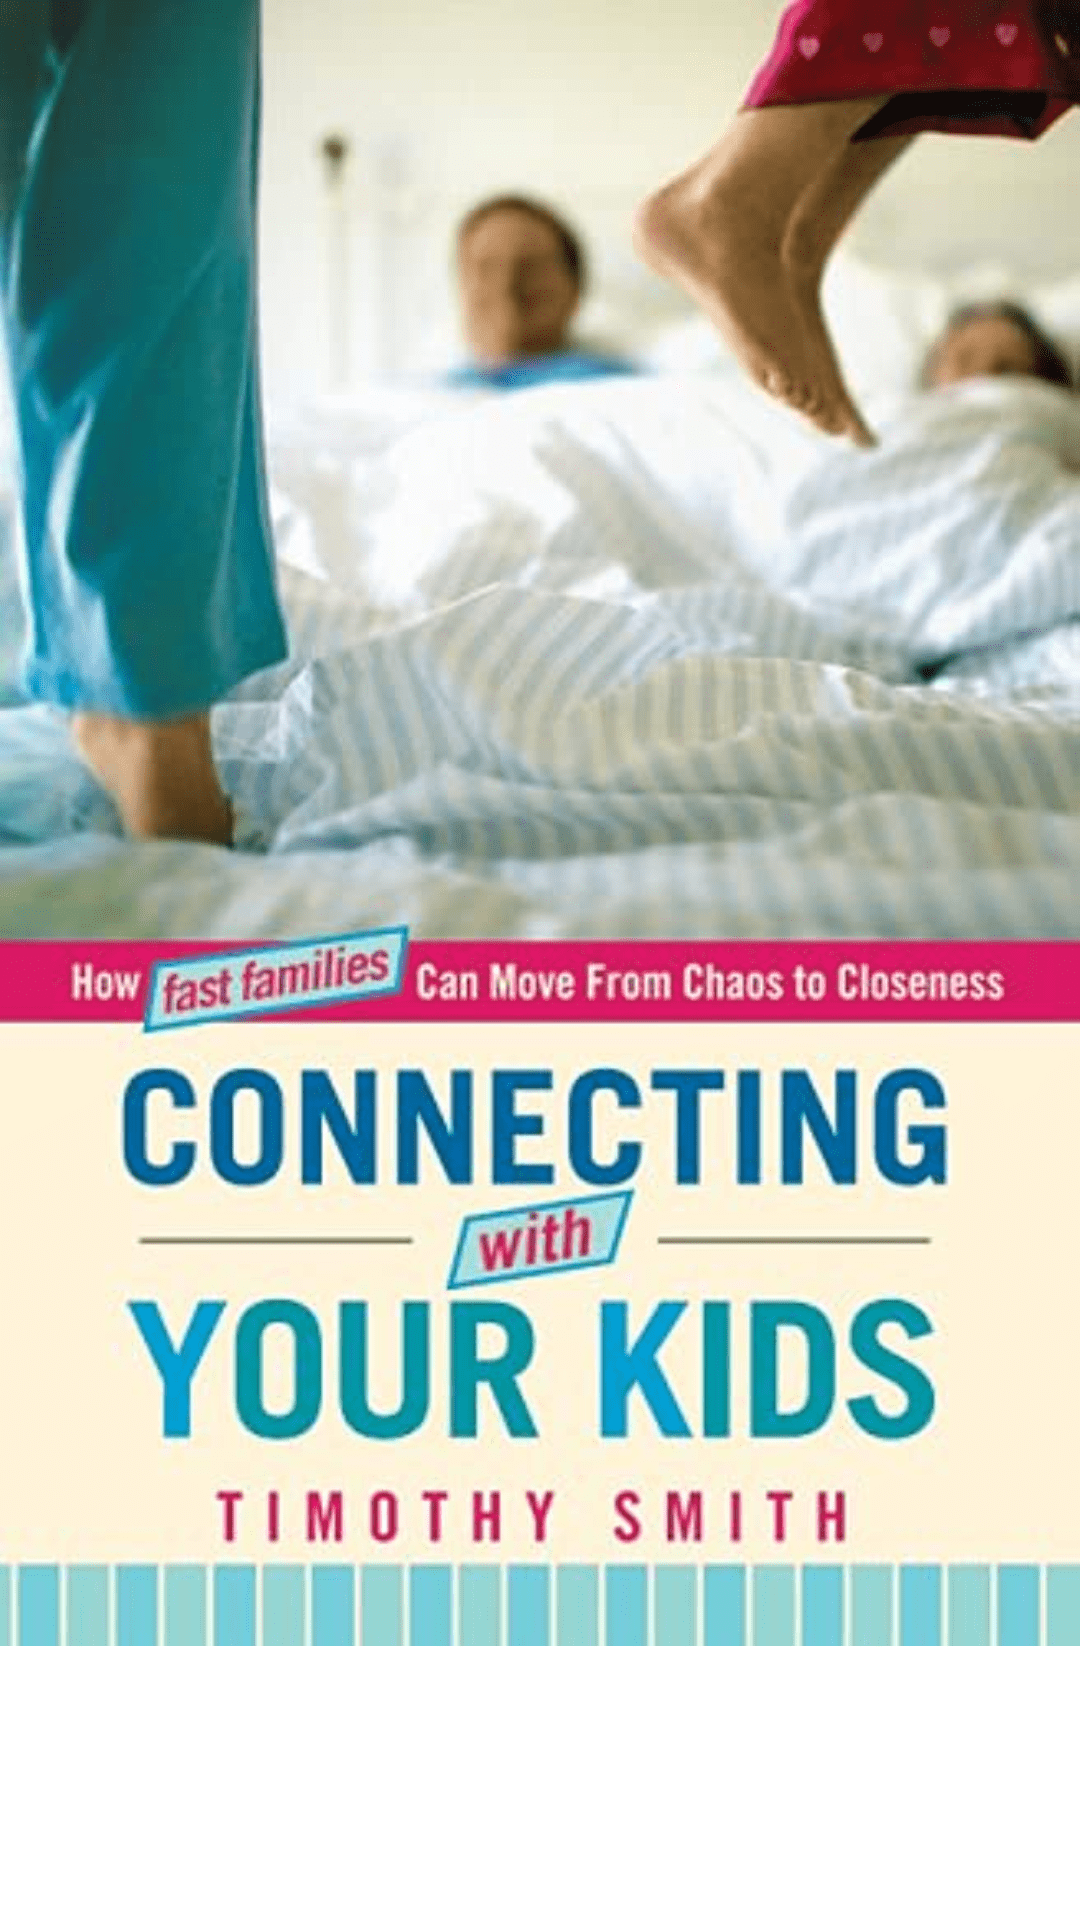 Connecting With Your Kids: How Fast Families Can Move from Chaos to Closeness